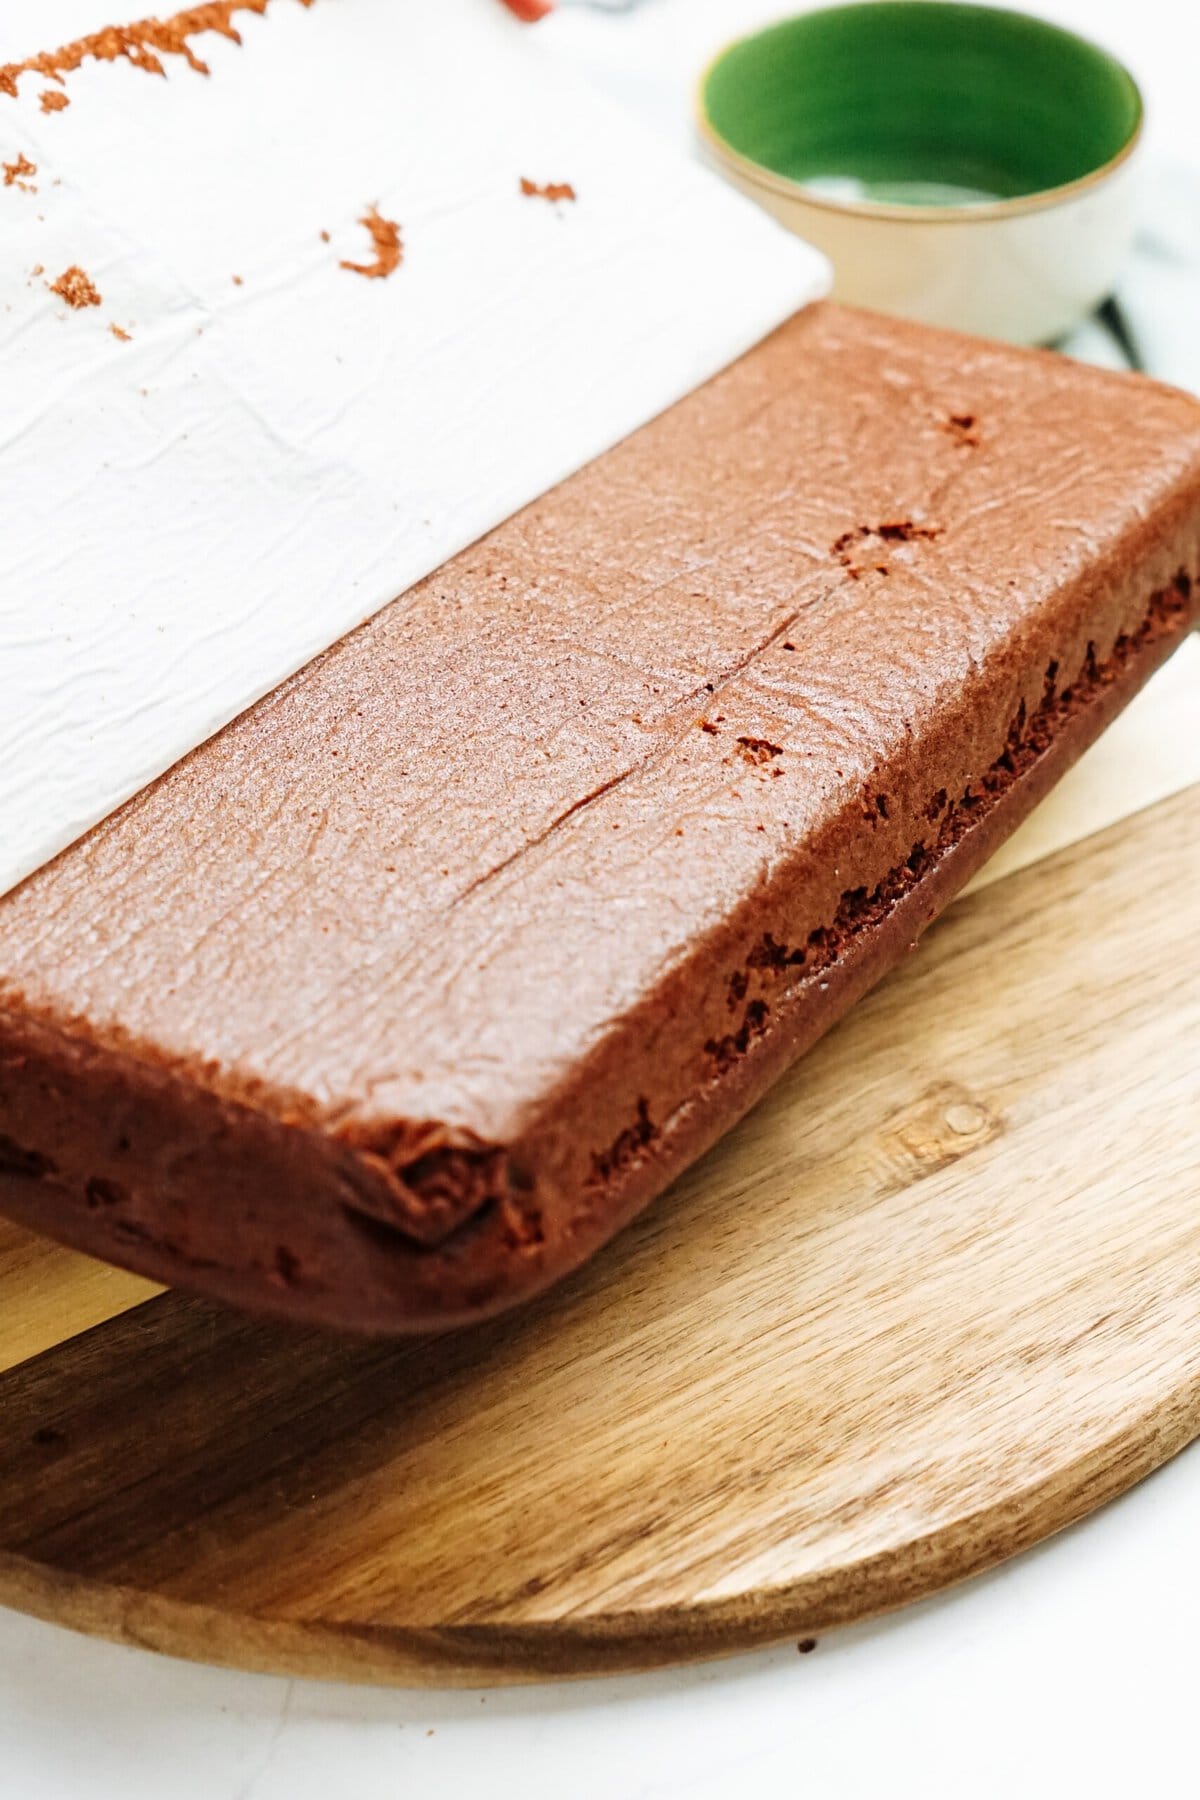 A piece of chocolate cake on a wooden cutting board.